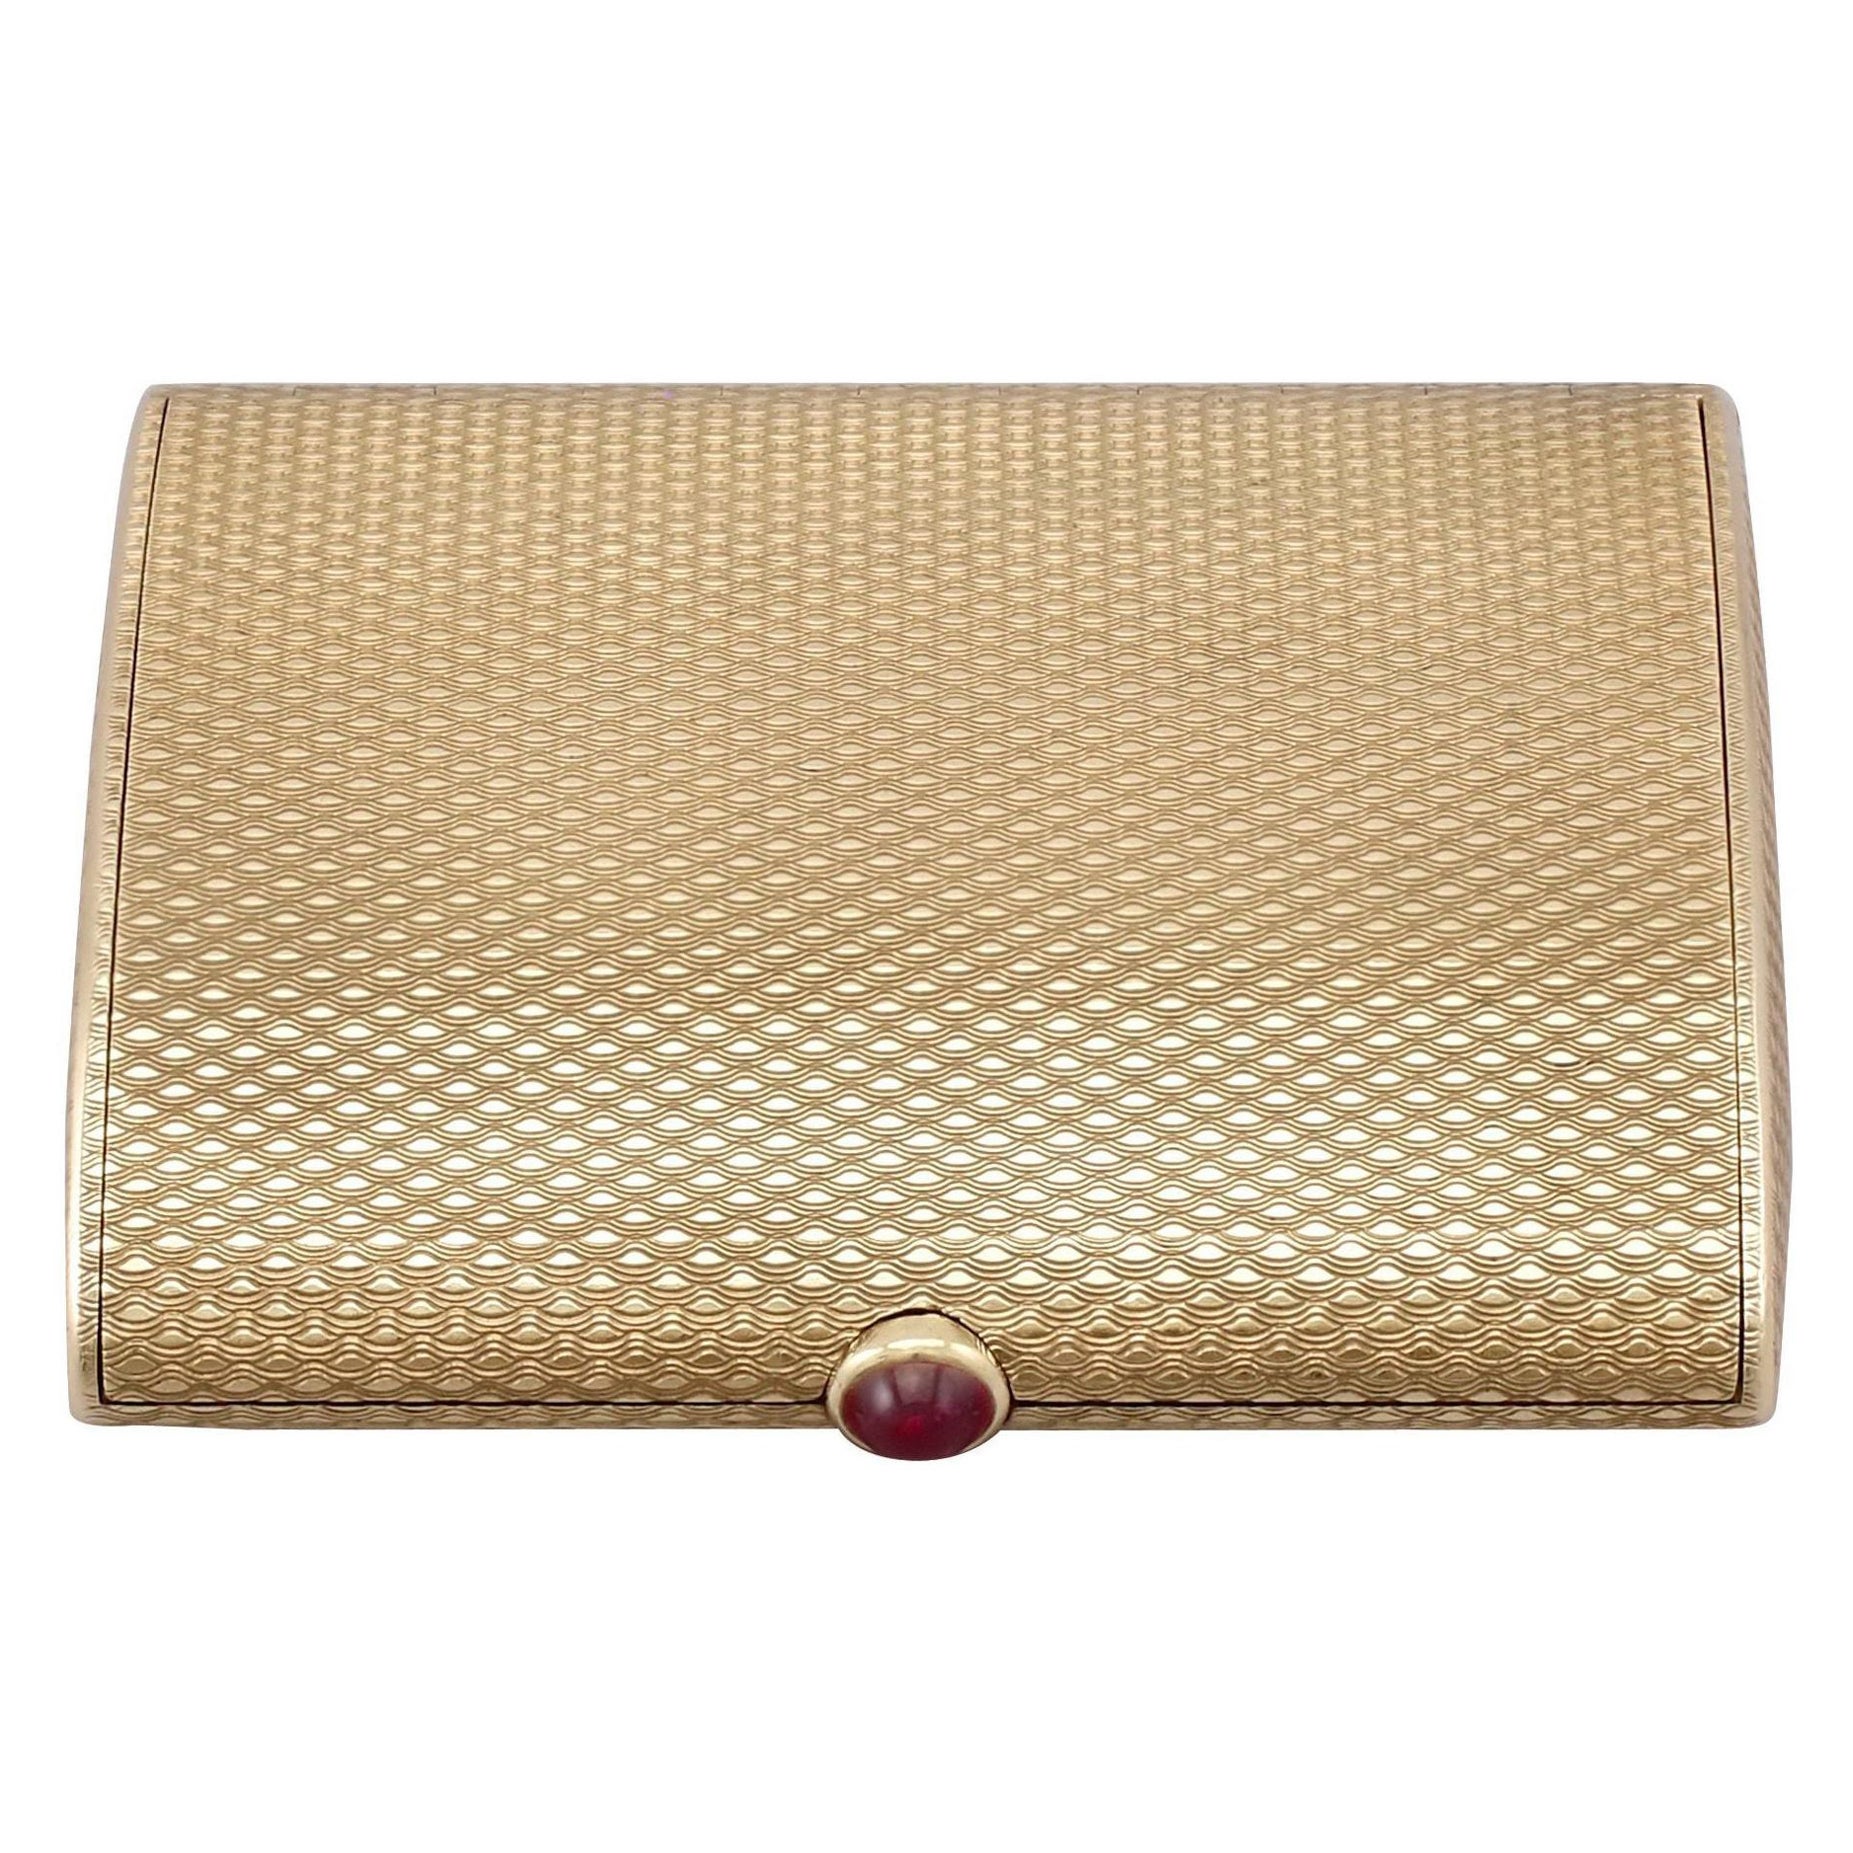 Vintage 1964 Yellow Gold and Ruby Compact by Boucheron